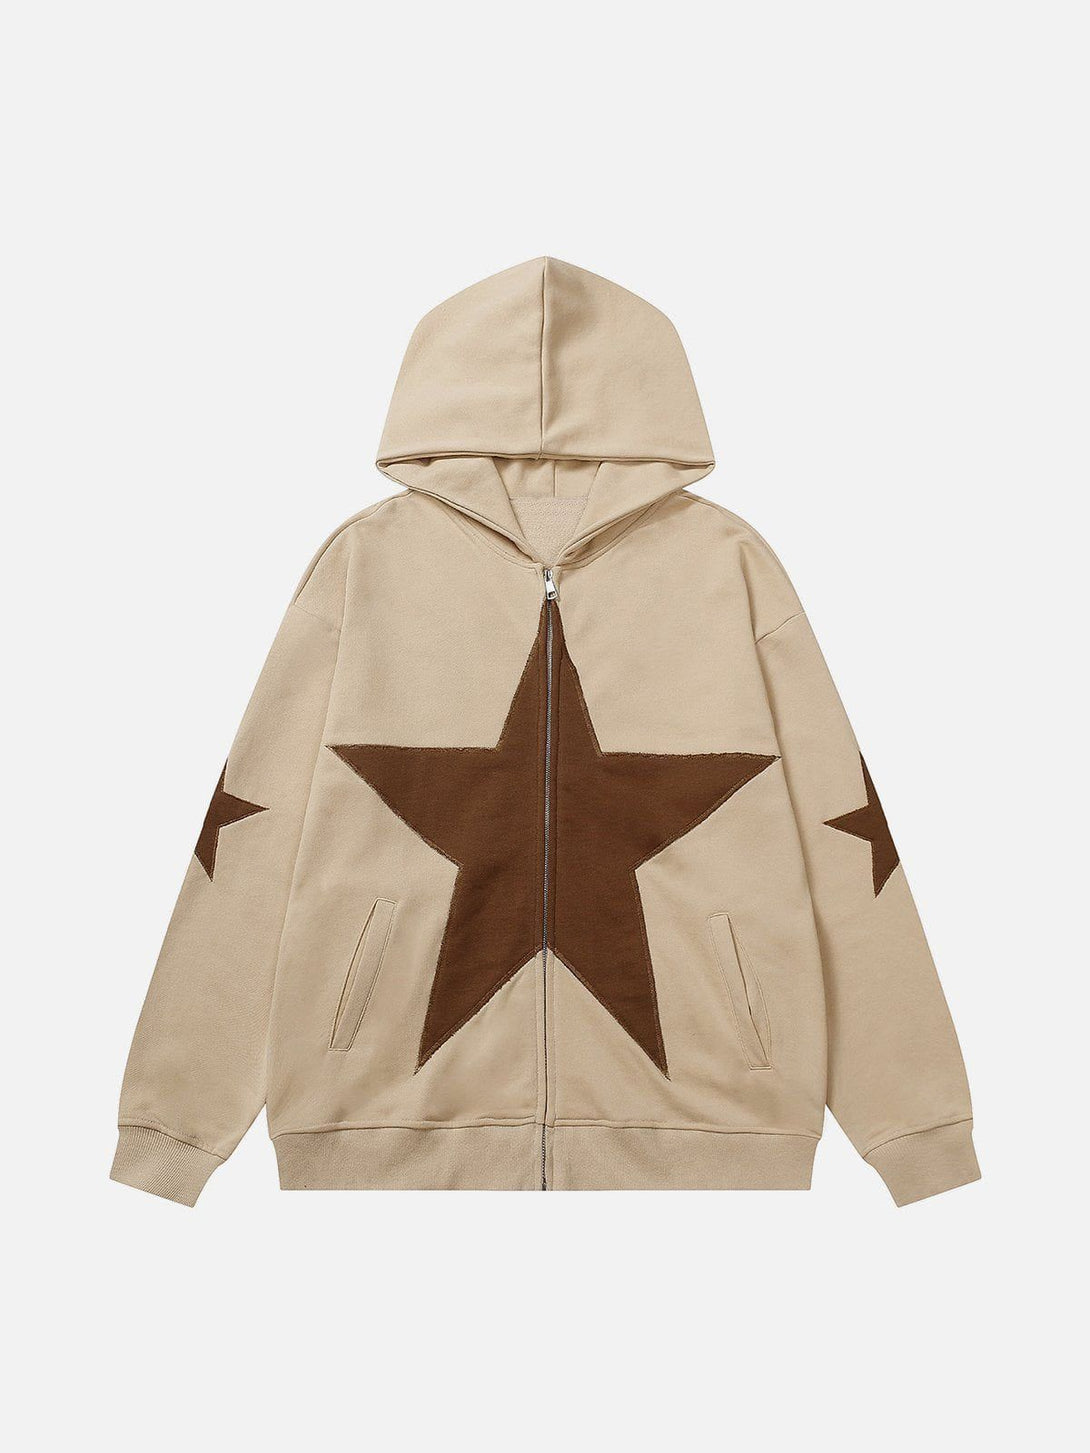 Levefly - Star Graphic Print Hoodie - Streetwear Fashion - levefly.com